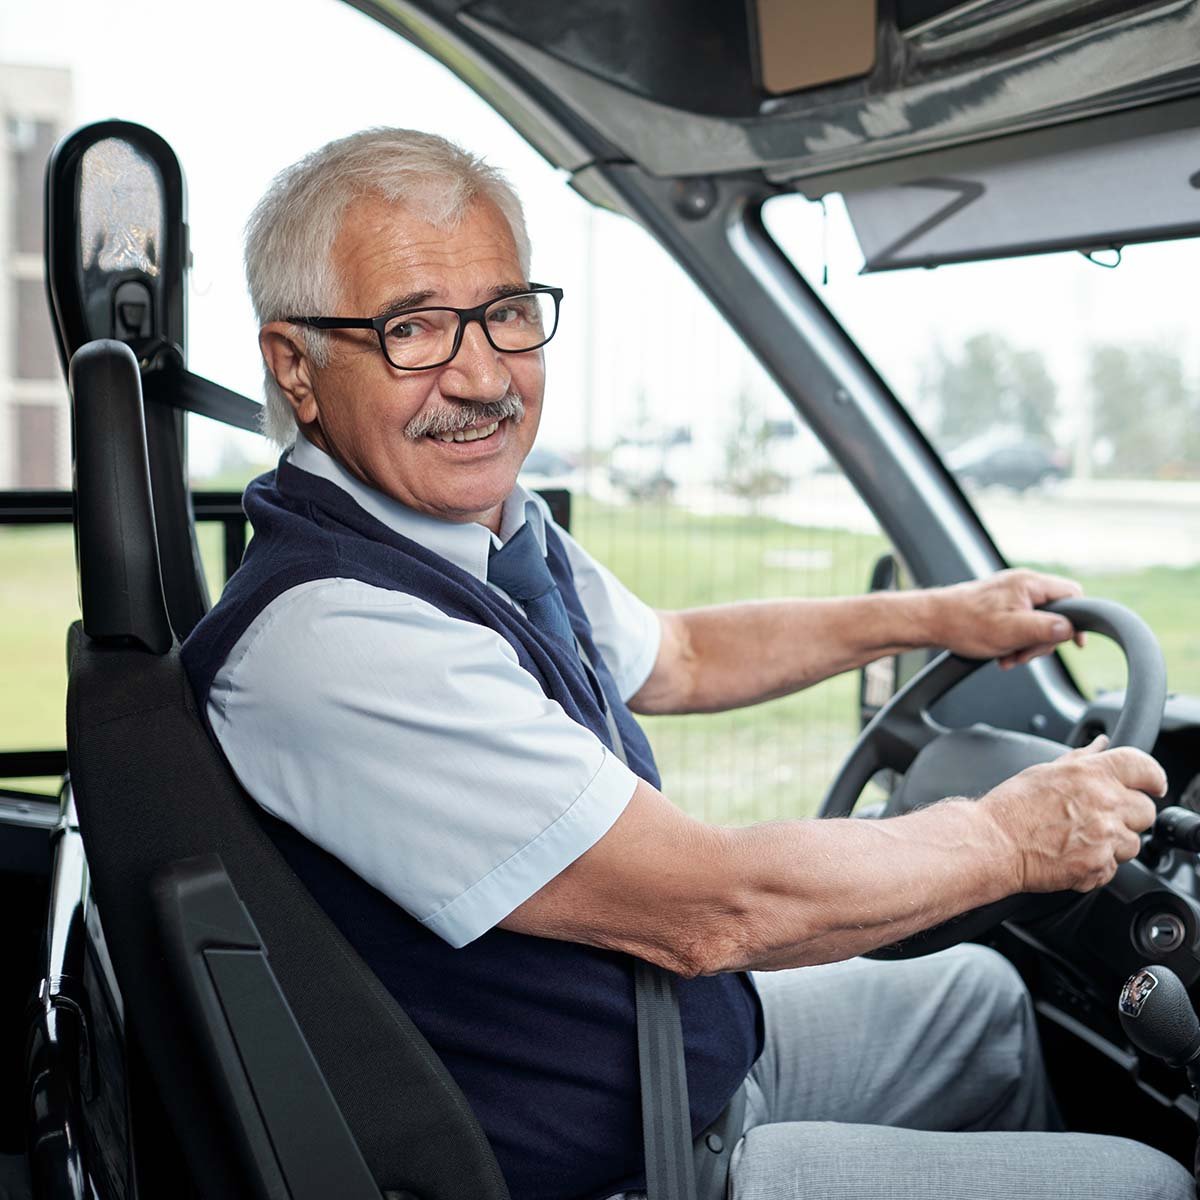 Bus driver smiling while in the driver's seat of a bus.